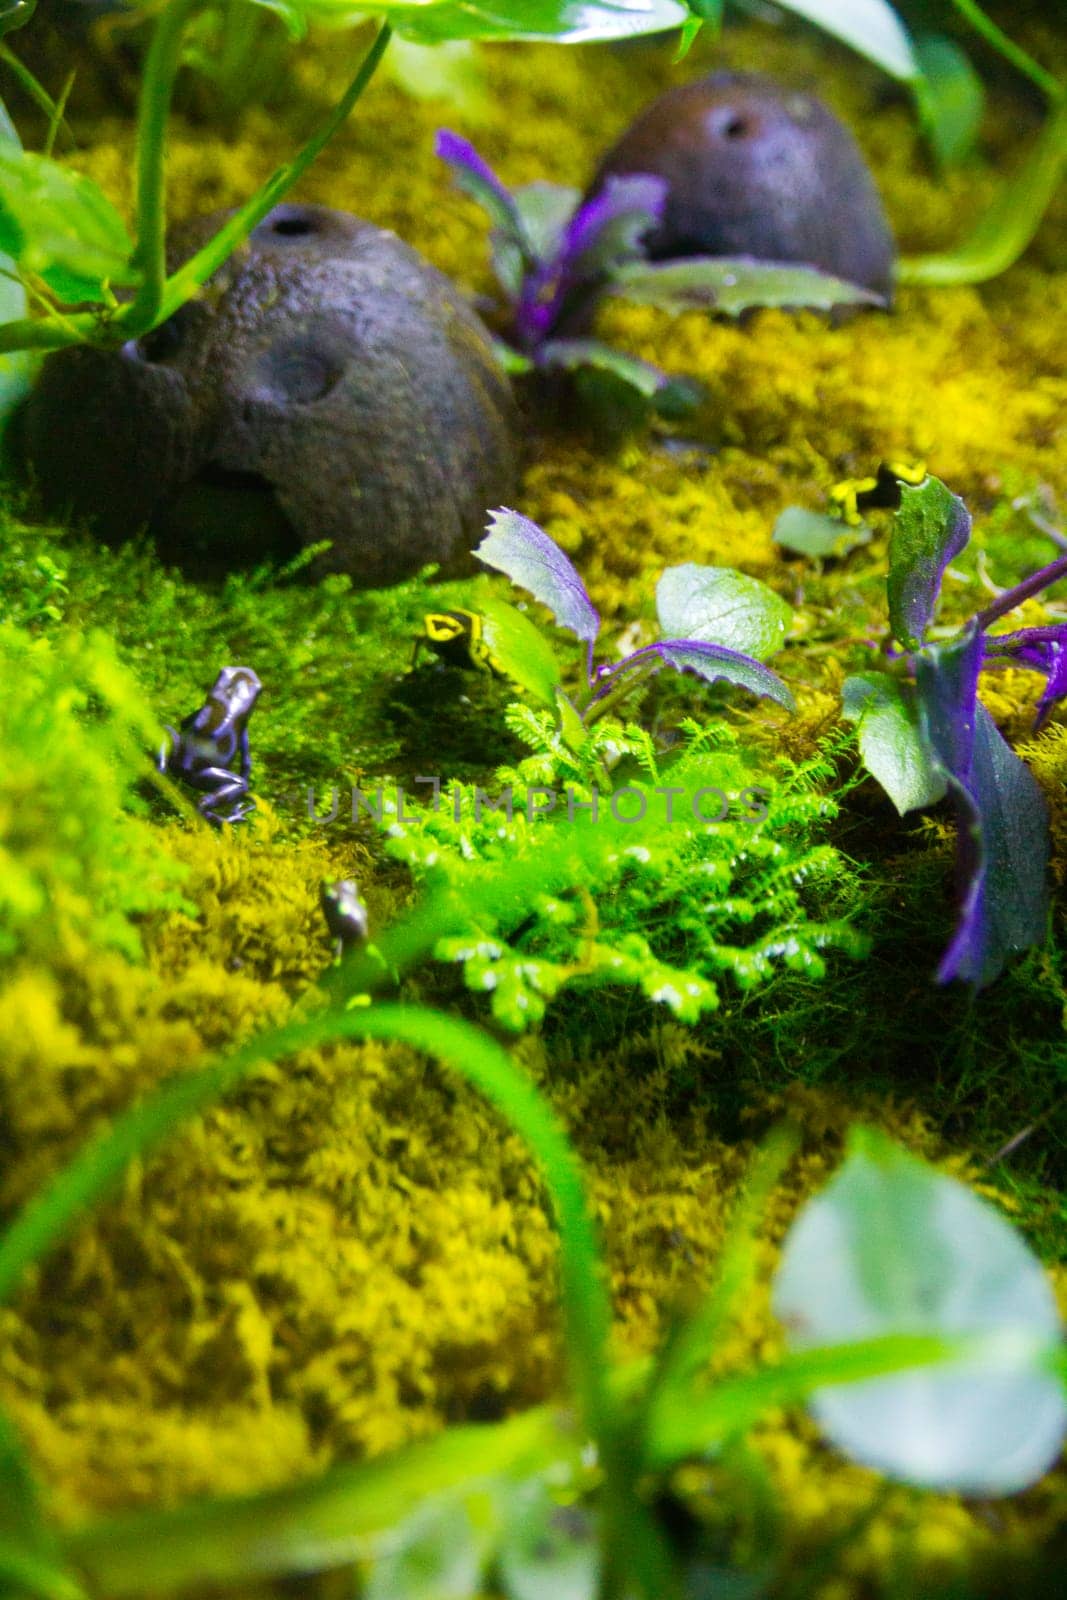 Vibrant tropical oasis: A black and white dart frog perches on lush moss amid aquatic plants in a captivating aquarium scene. Perfect for nature and pet care themes.